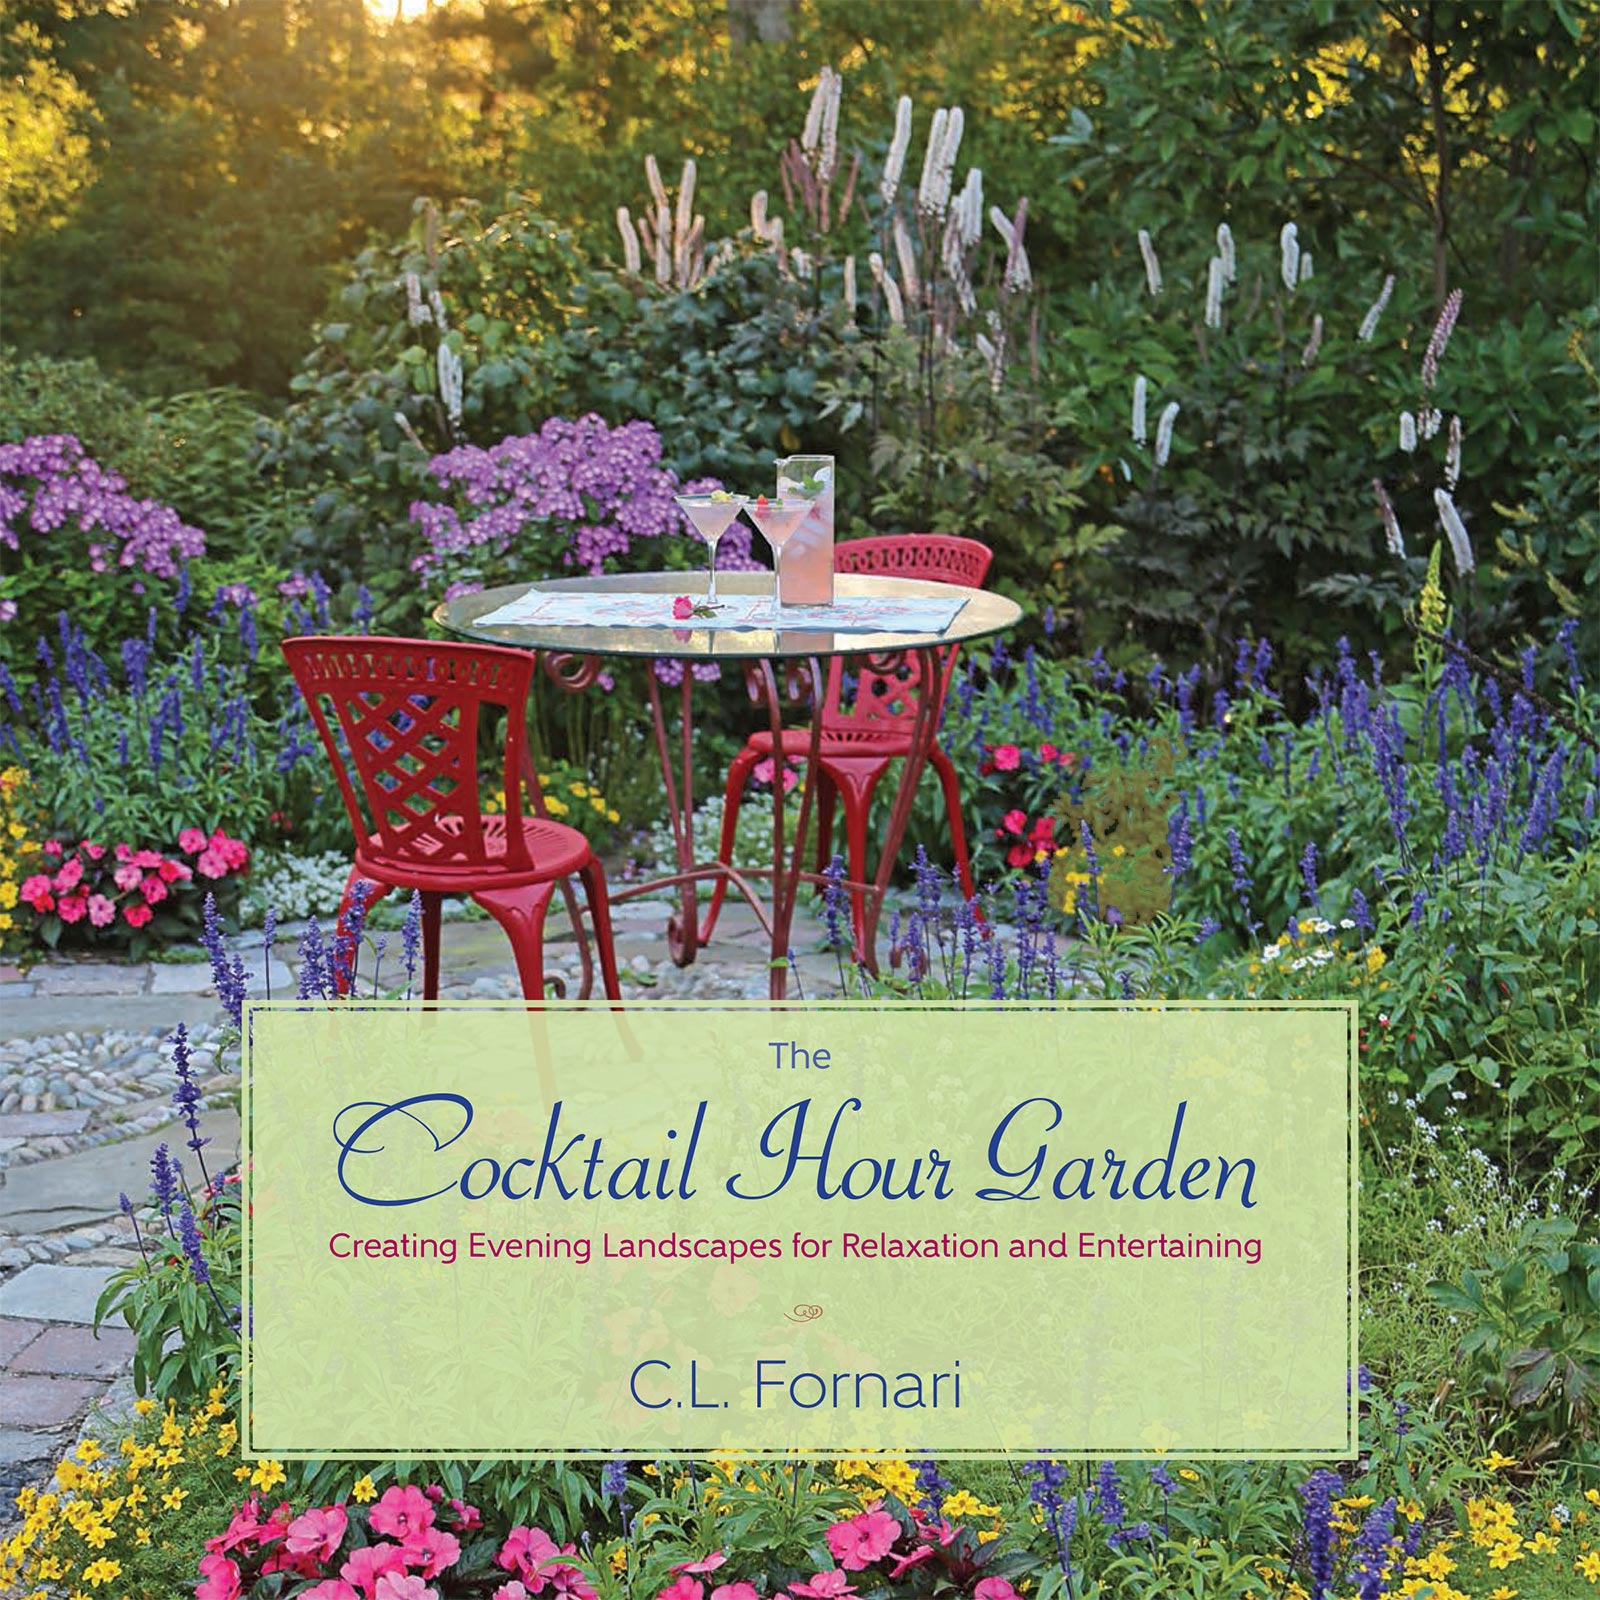 The Cocktail Hour Garden book by C.L. Fornari